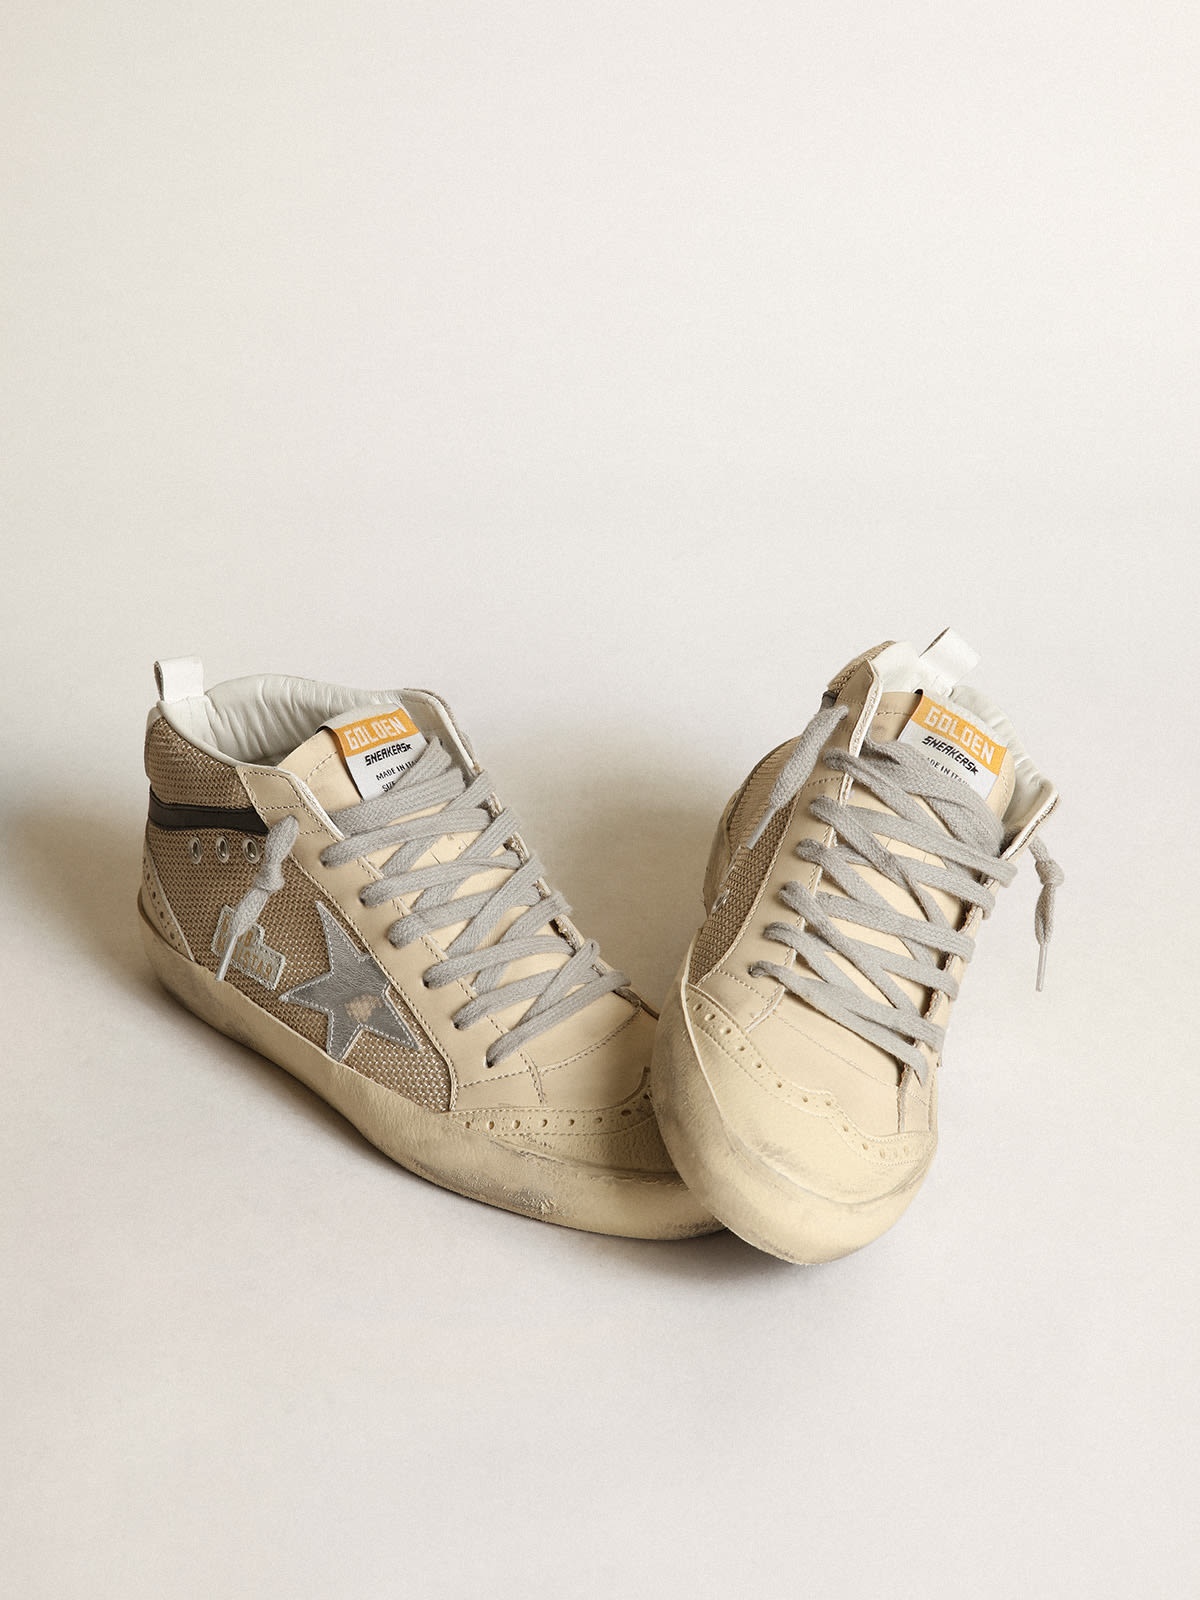 Mid Star LTD sneakers in cream-colored mesh with silver metallic leather star and black leather flas - 2